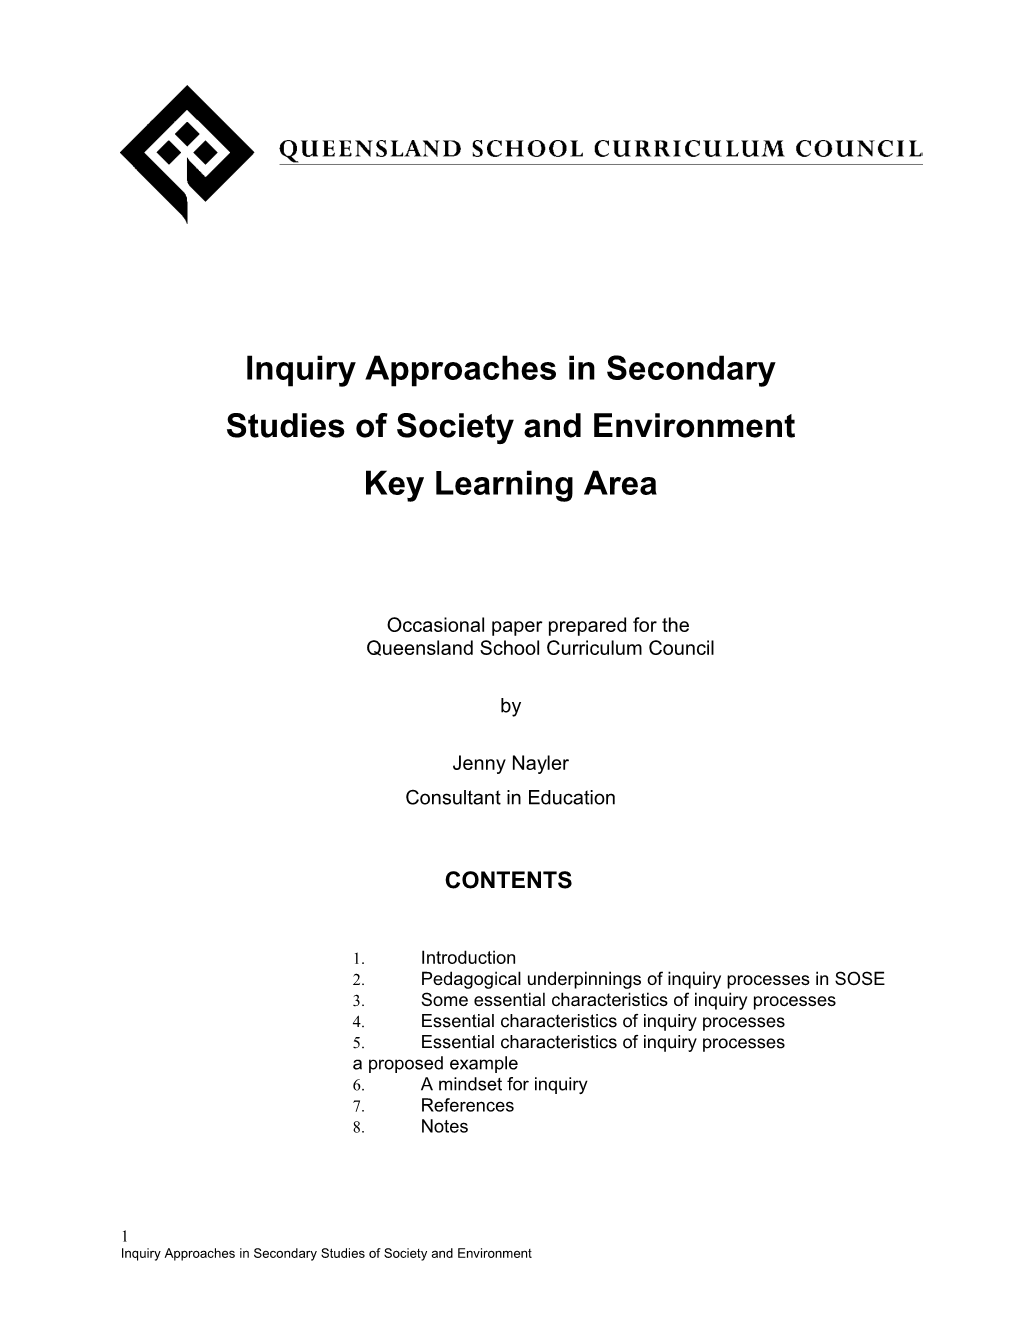 Inquiry Approaches in Secondary Studies of Society and Environment Key Learning Area